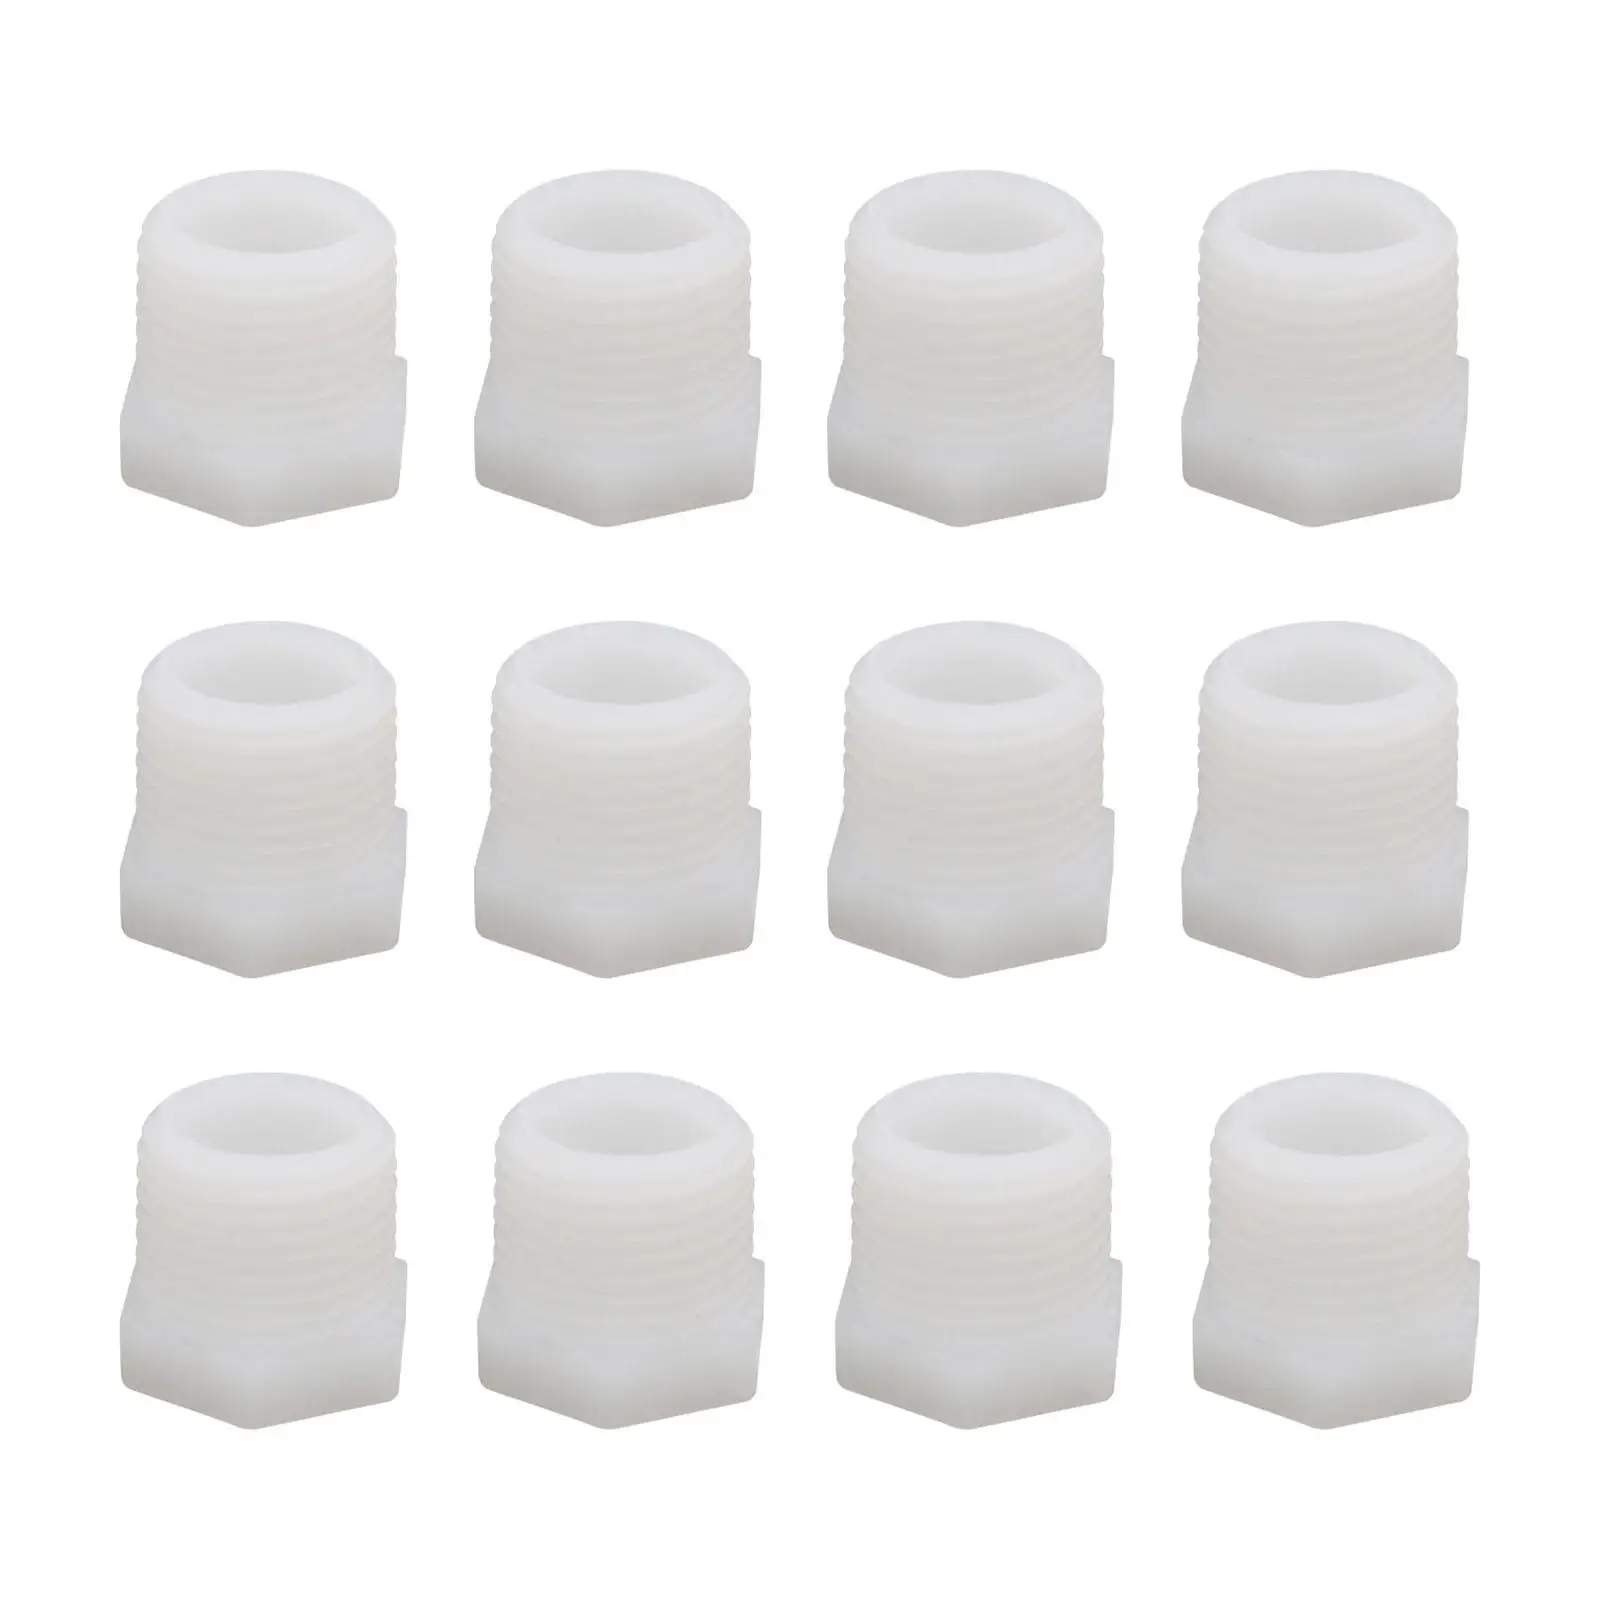 12 Pieces Drain Plugs Easily Install Good Performance Durable Spare Parts